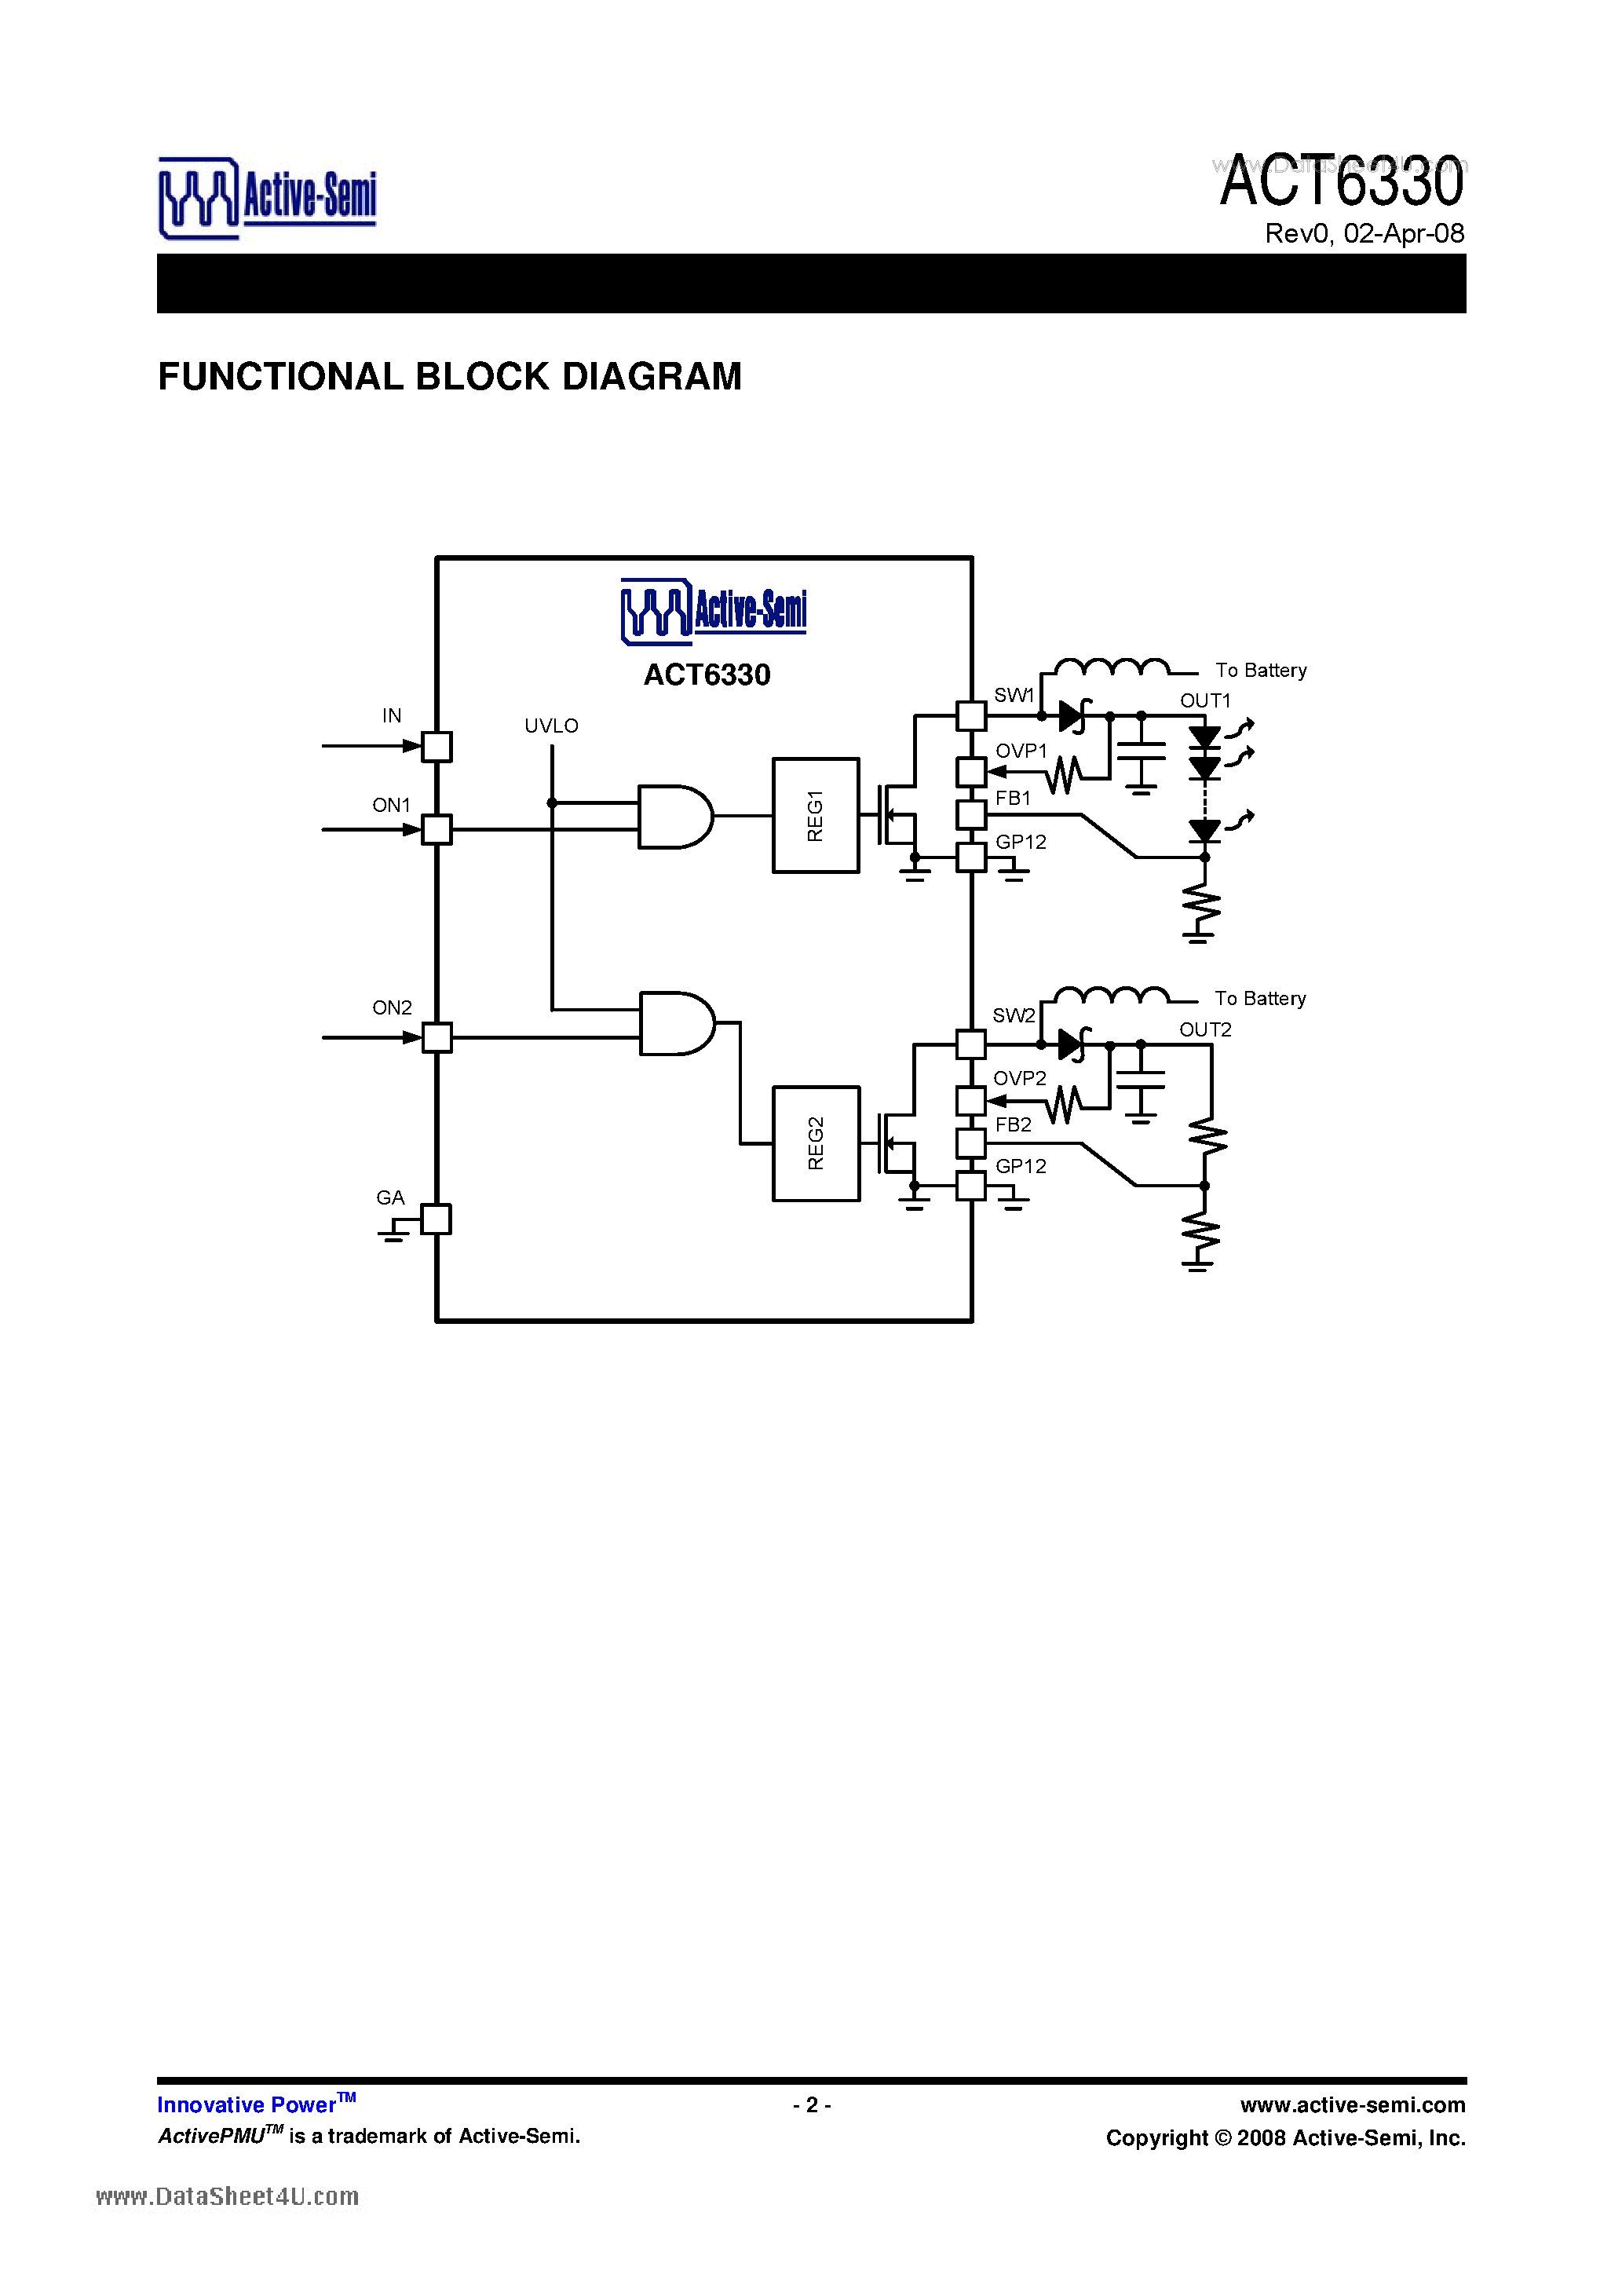 Datasheet ACT6330 - Dual PWM Step-Up DC/DCs page 2